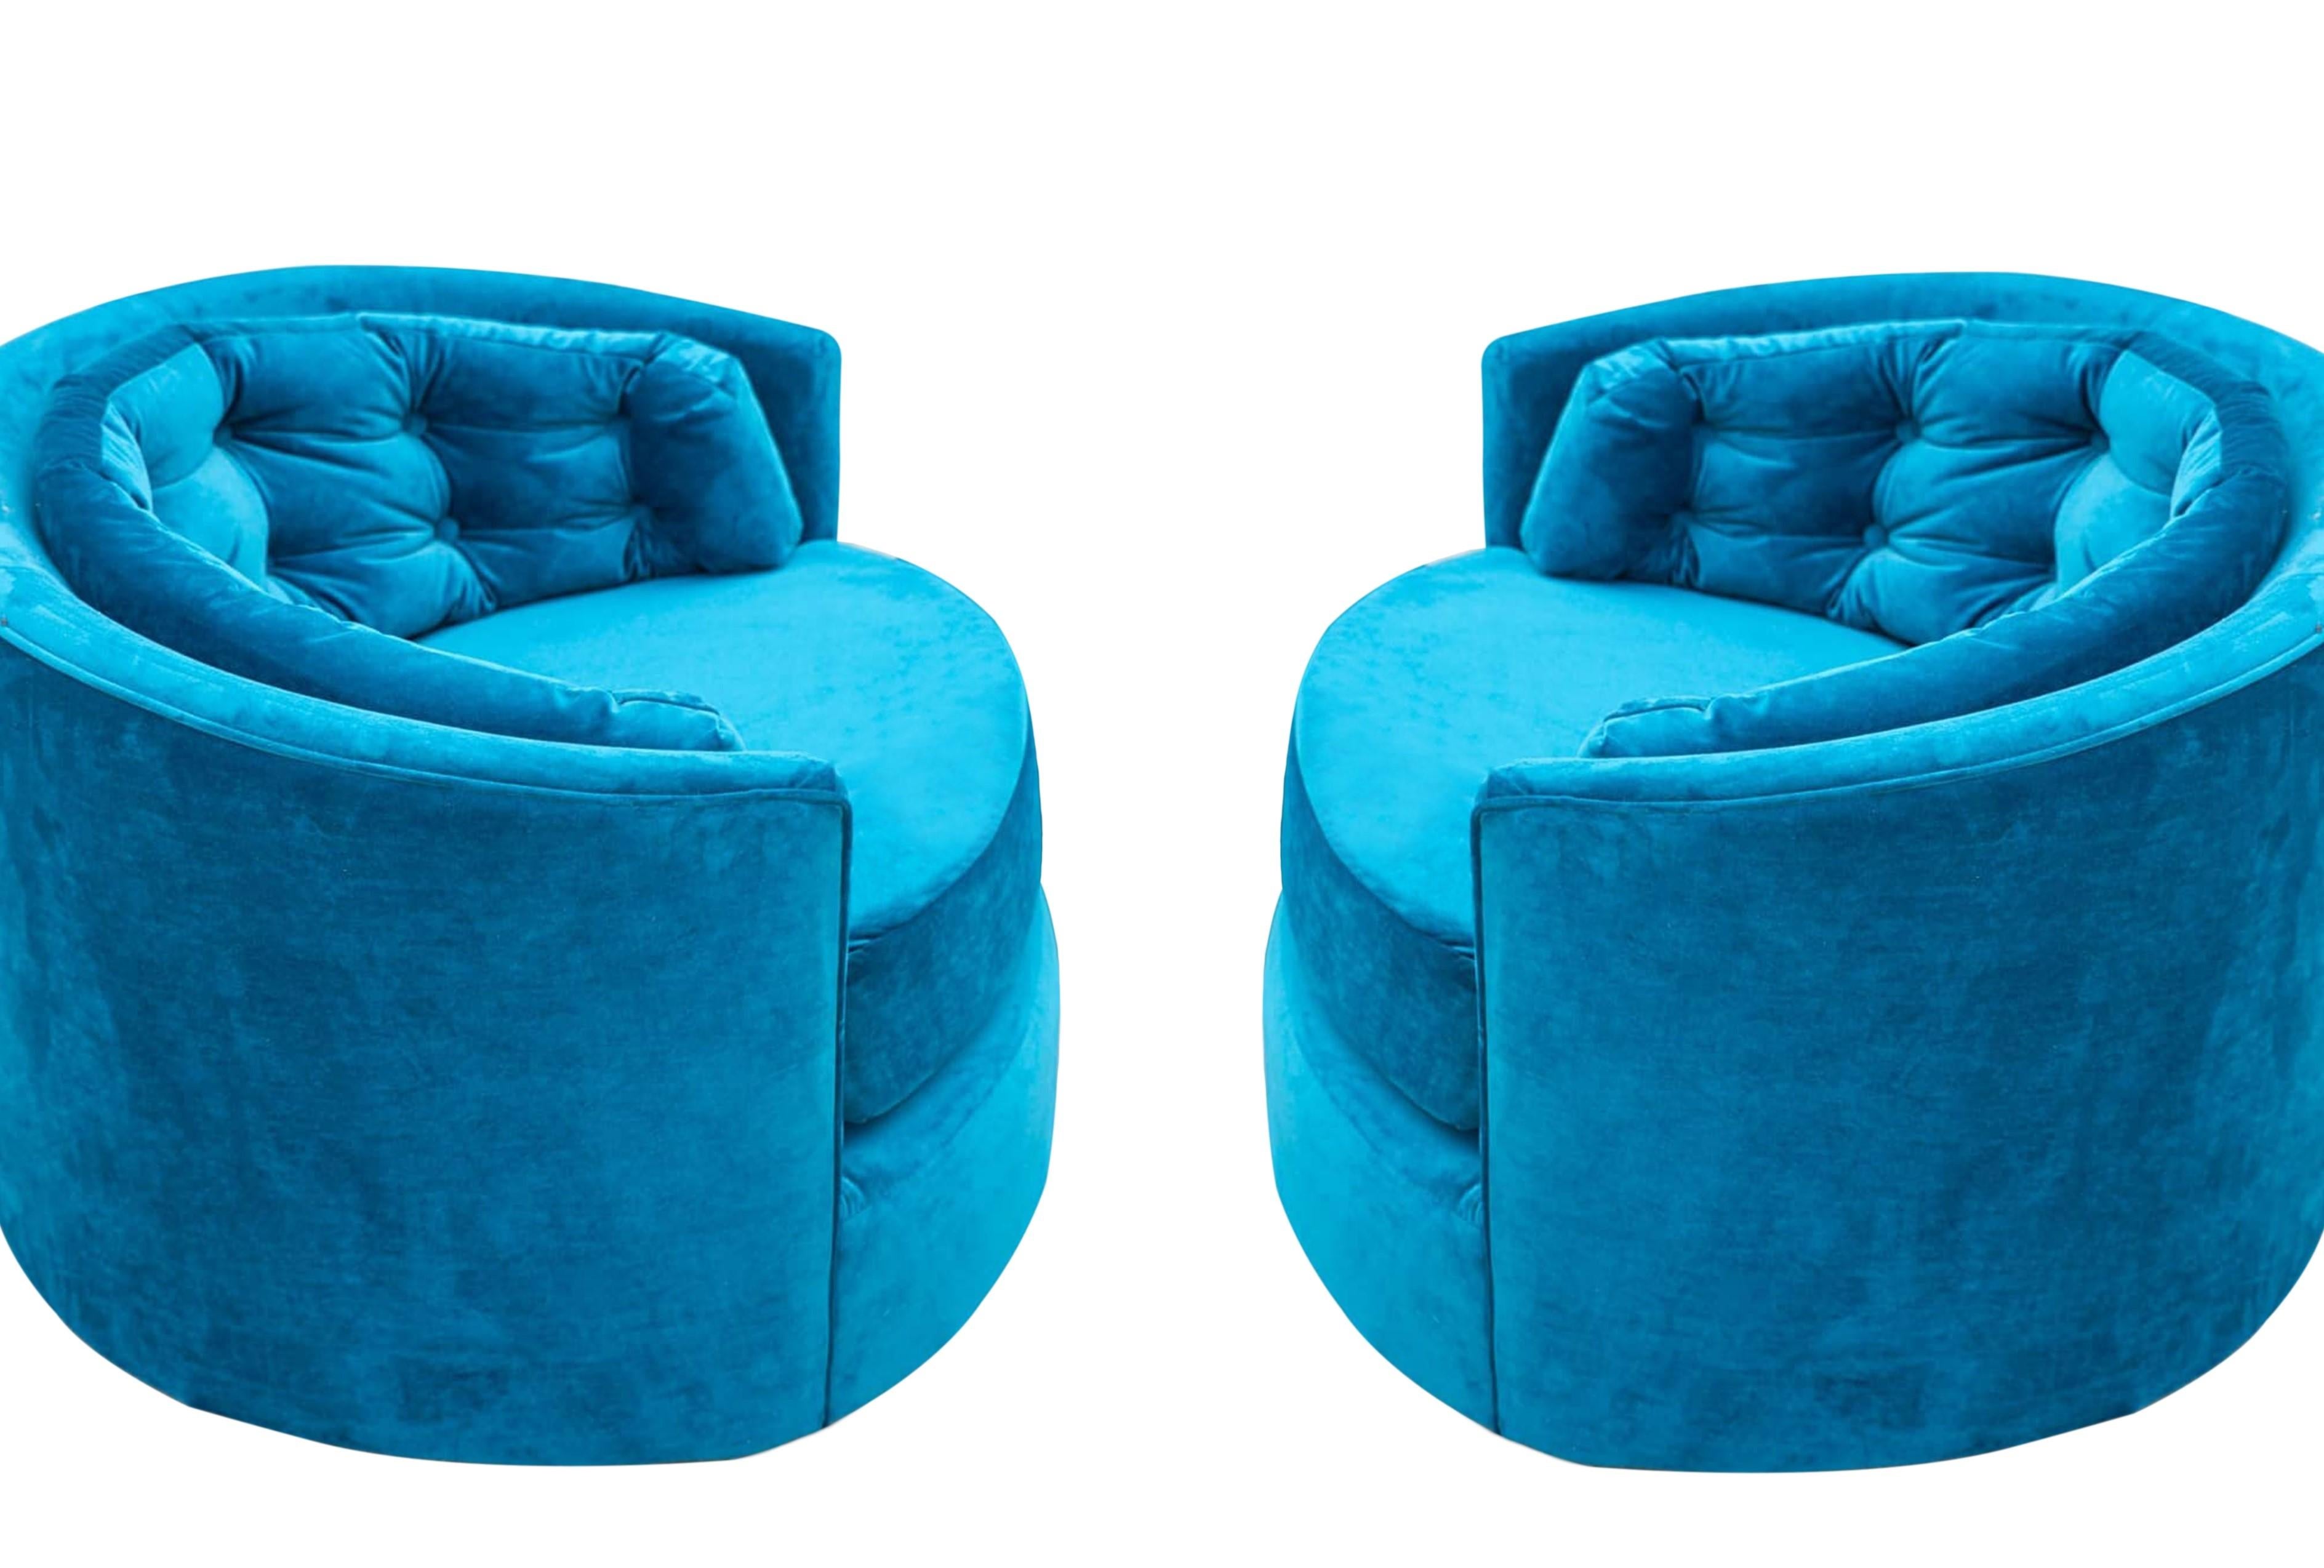 American Mid-Century Modern Oversized Swivel Tub Chairs in the Style of Milo Baughman